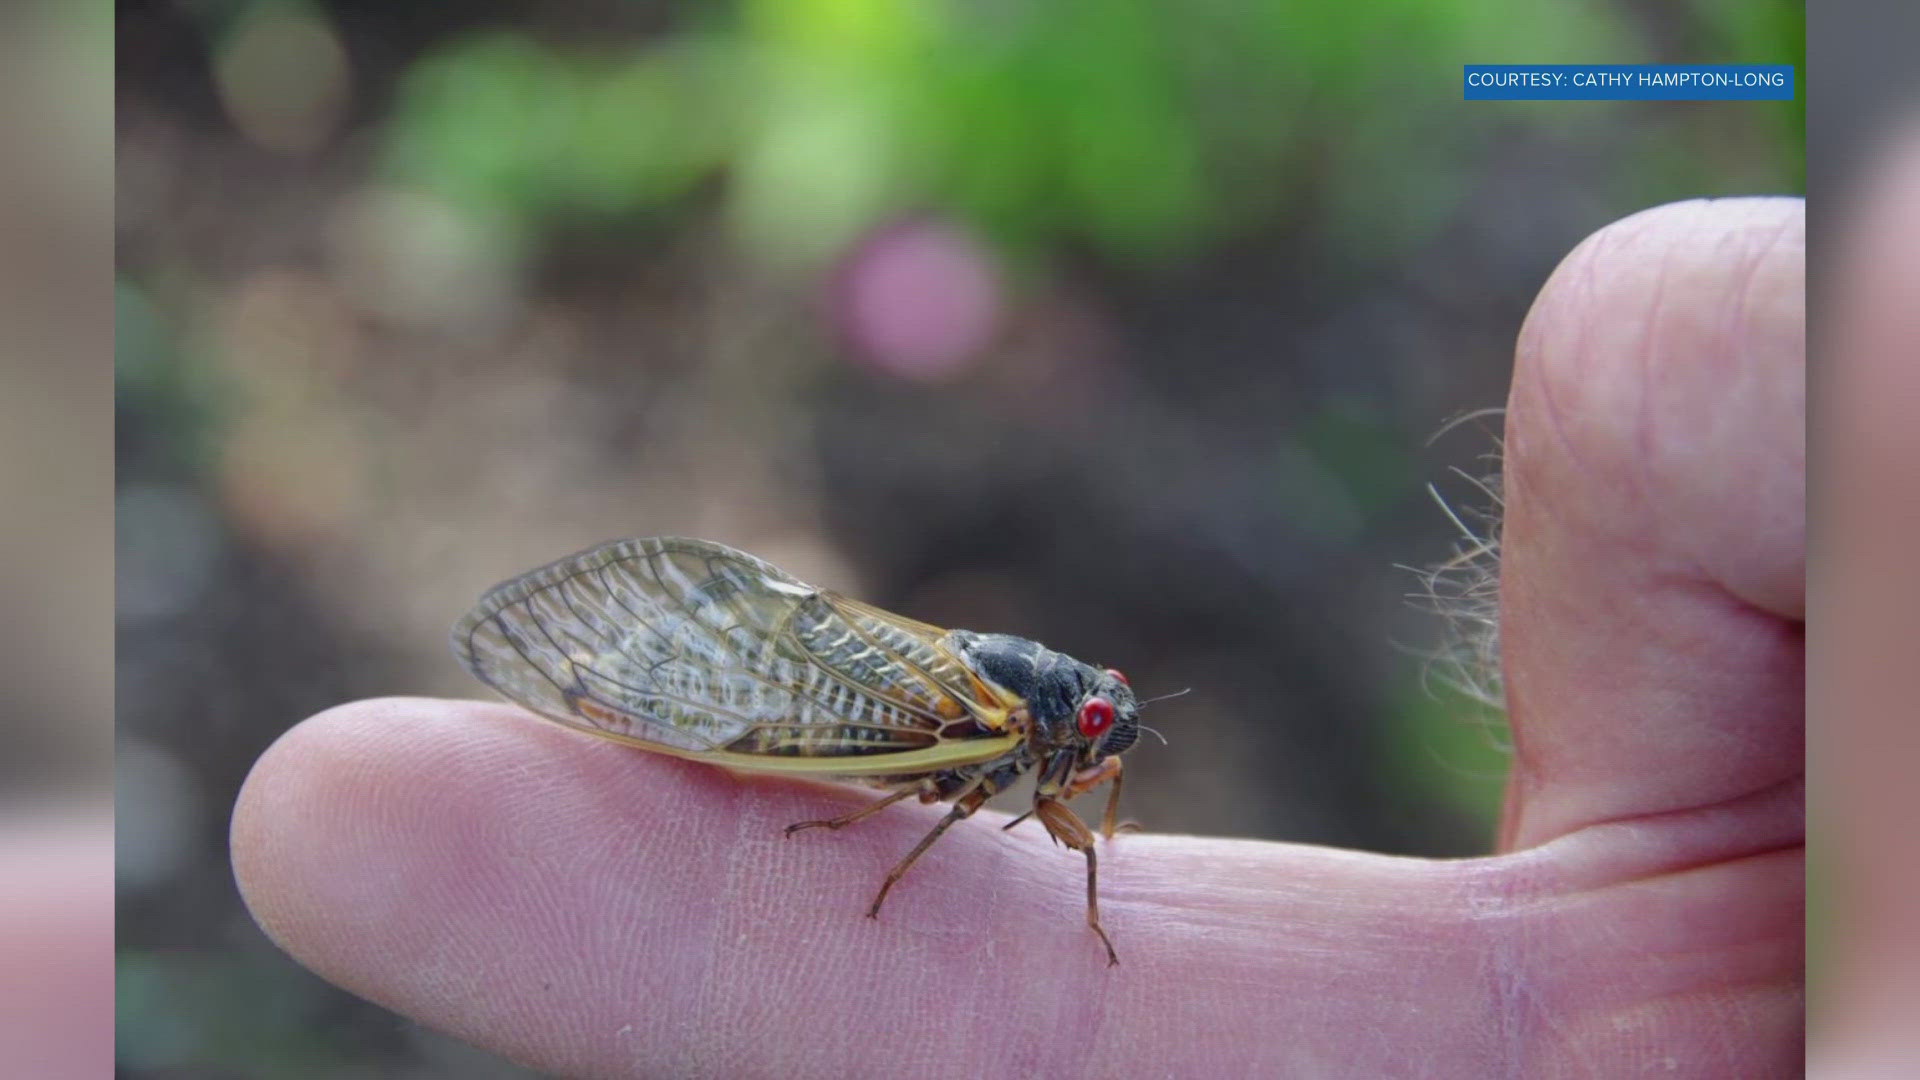 We are seeing some of the first pictures of the cicadas. So, it's about to get loud across parts of East Tennessee.